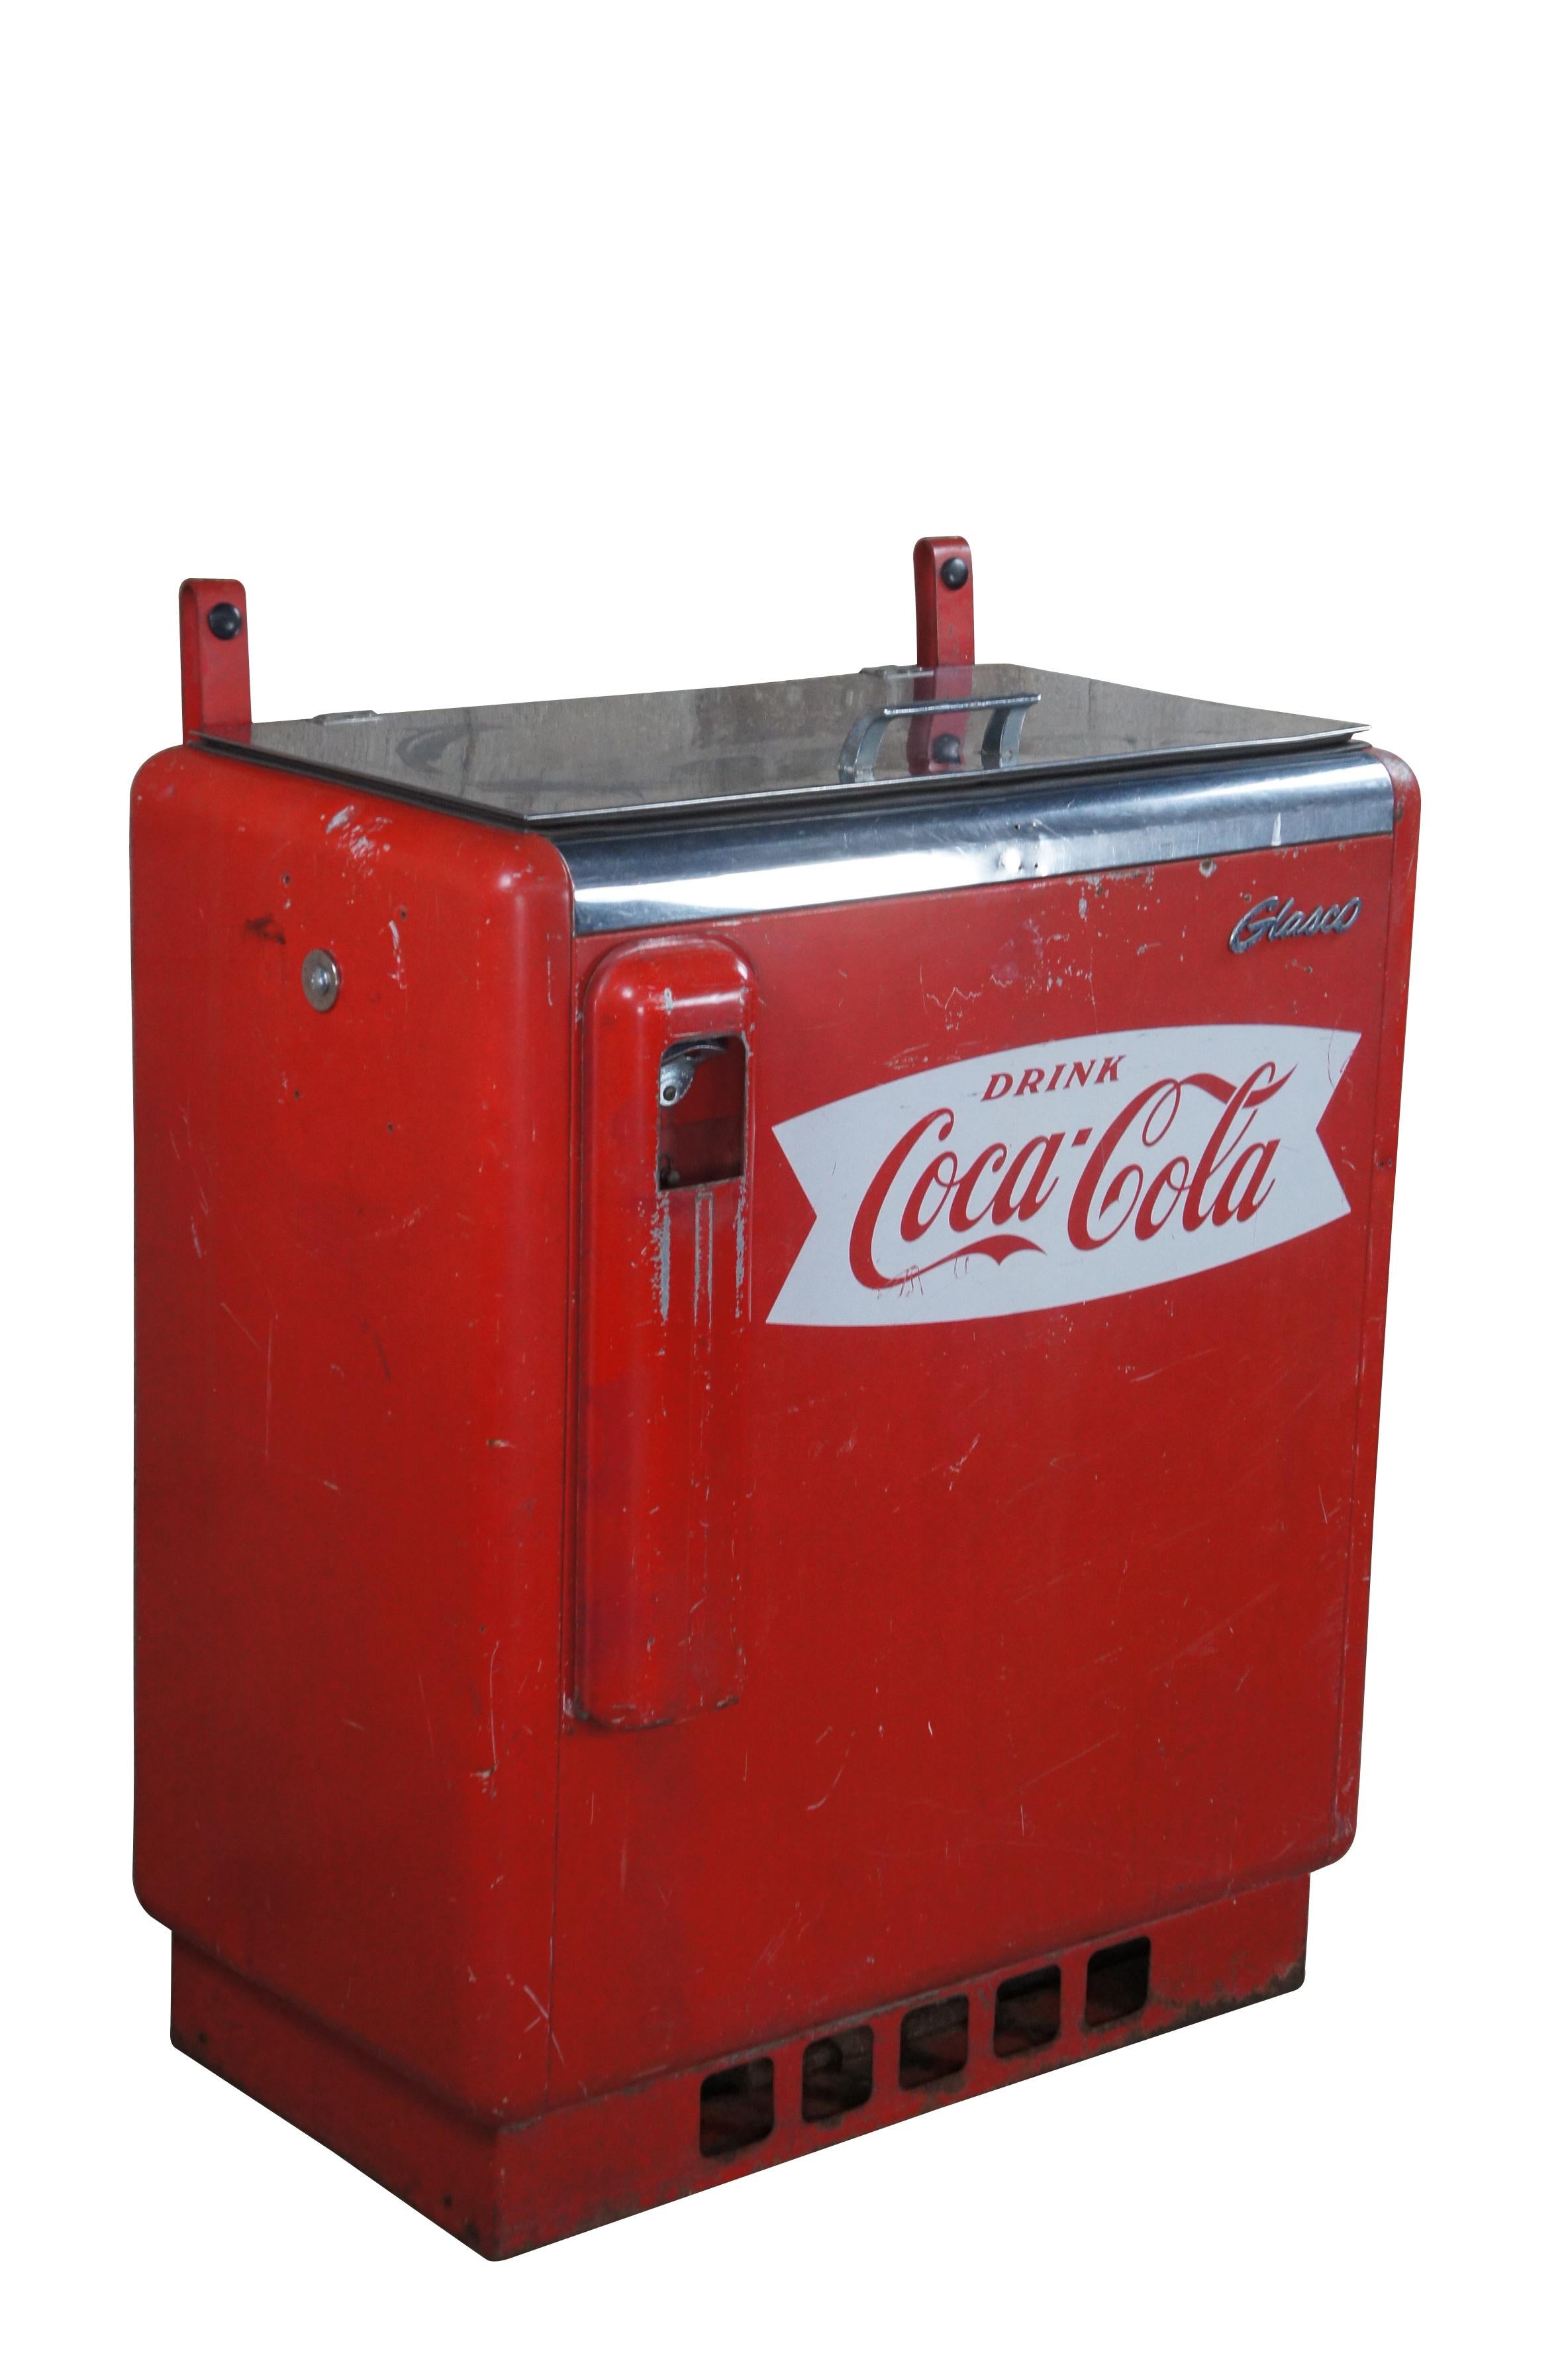 The Glasco GBV50 Slider or Glasco Starlet (its marketing name) is a cooler and vending machine first introduced by Glasco in 1957. This is a chest-type cooler adapted to vend bottles manually with a coin entry plate to the left side of the machine.